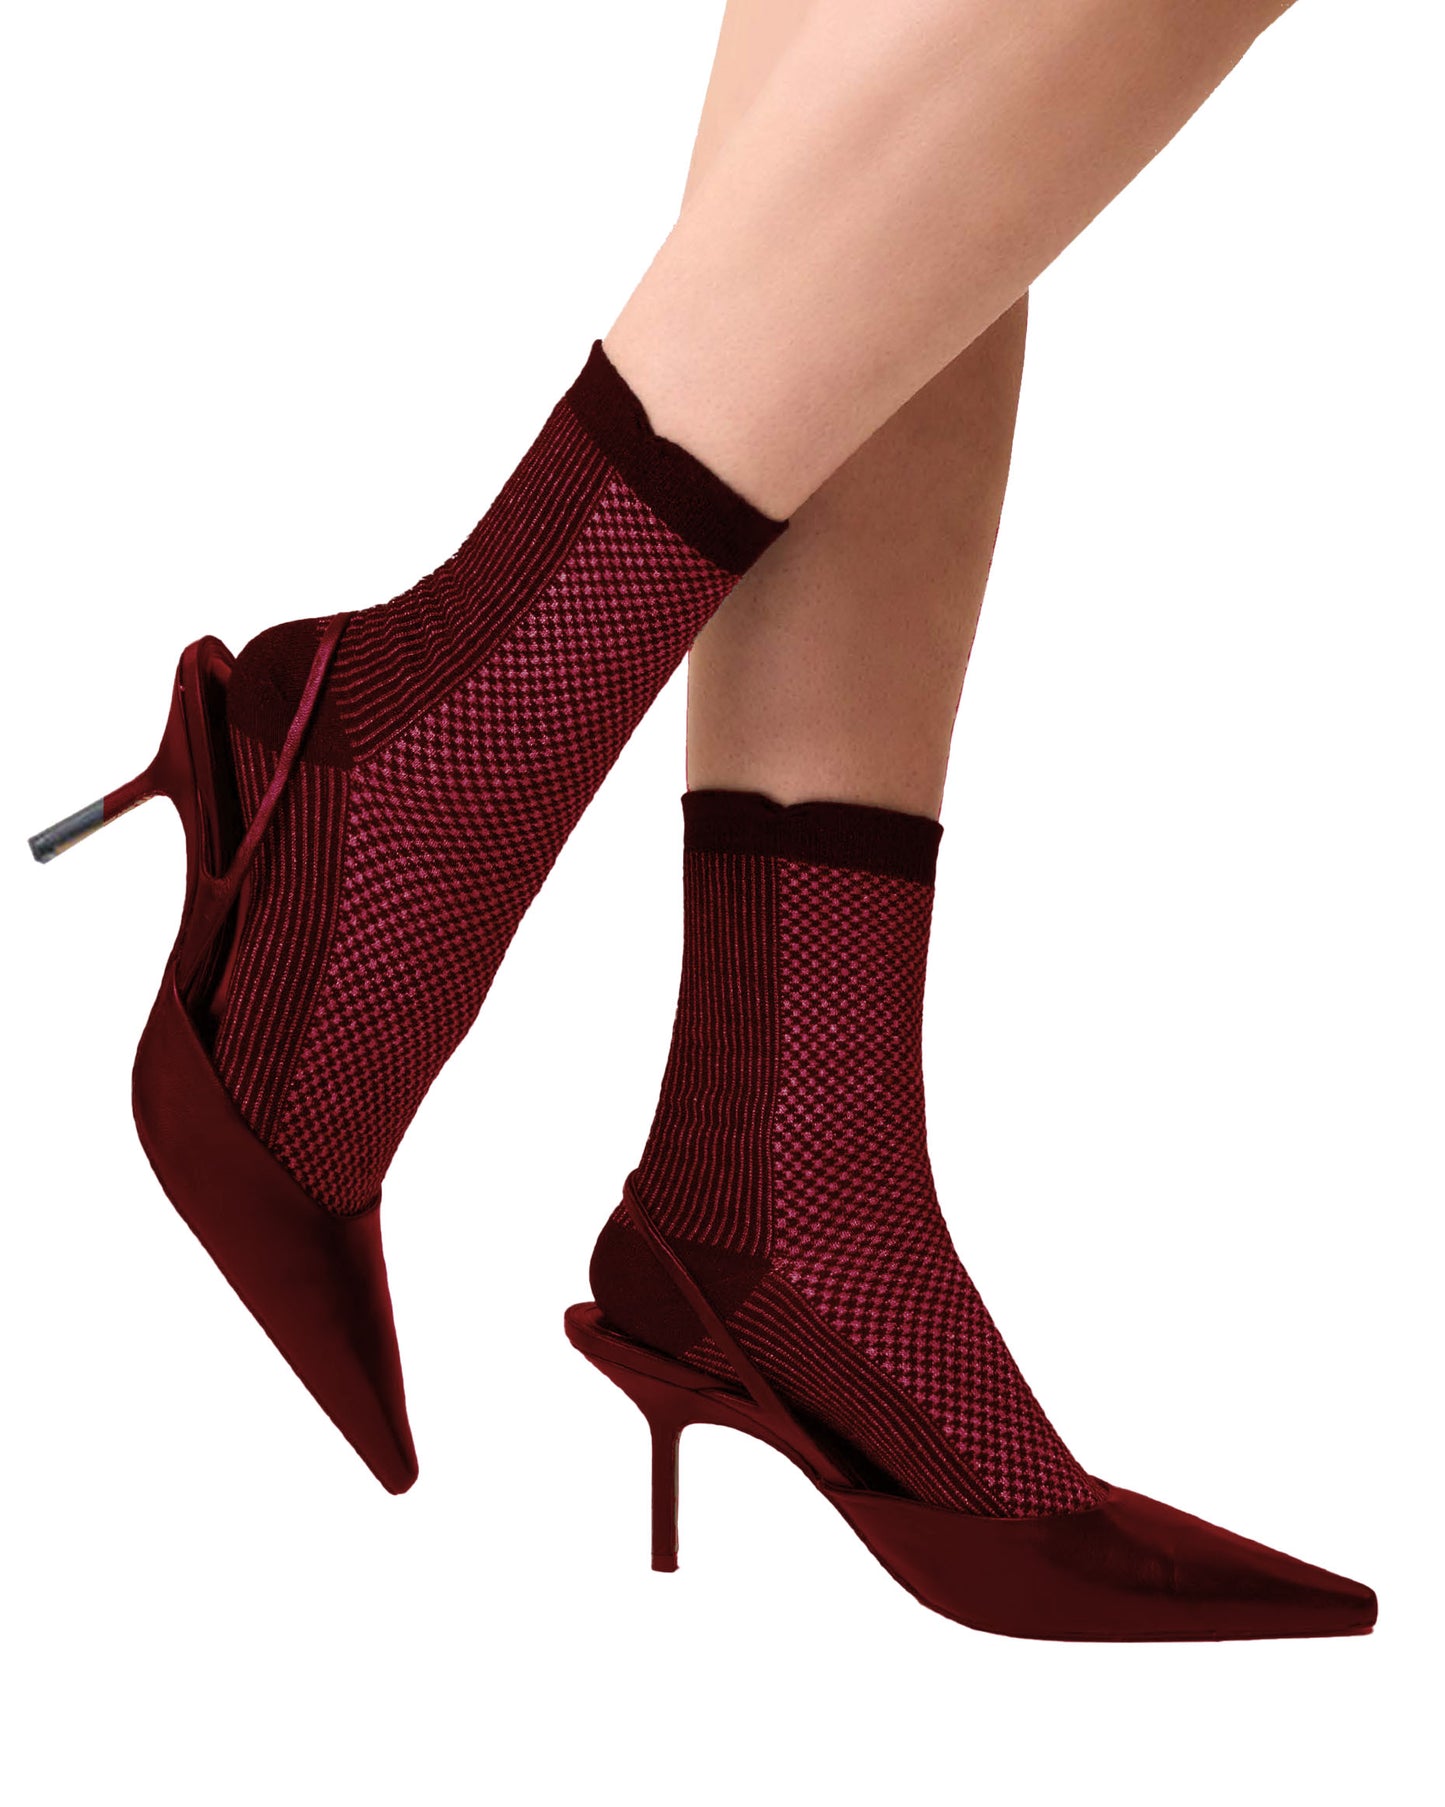 SiSi Tweed Calzino - Maroon / wine viscose mix ankle socks with black micro houndstooth pattern on the front and pinstripe on the back with sparkly lame' knitted throughout, comfort cuff with subtle gathering on the sides.